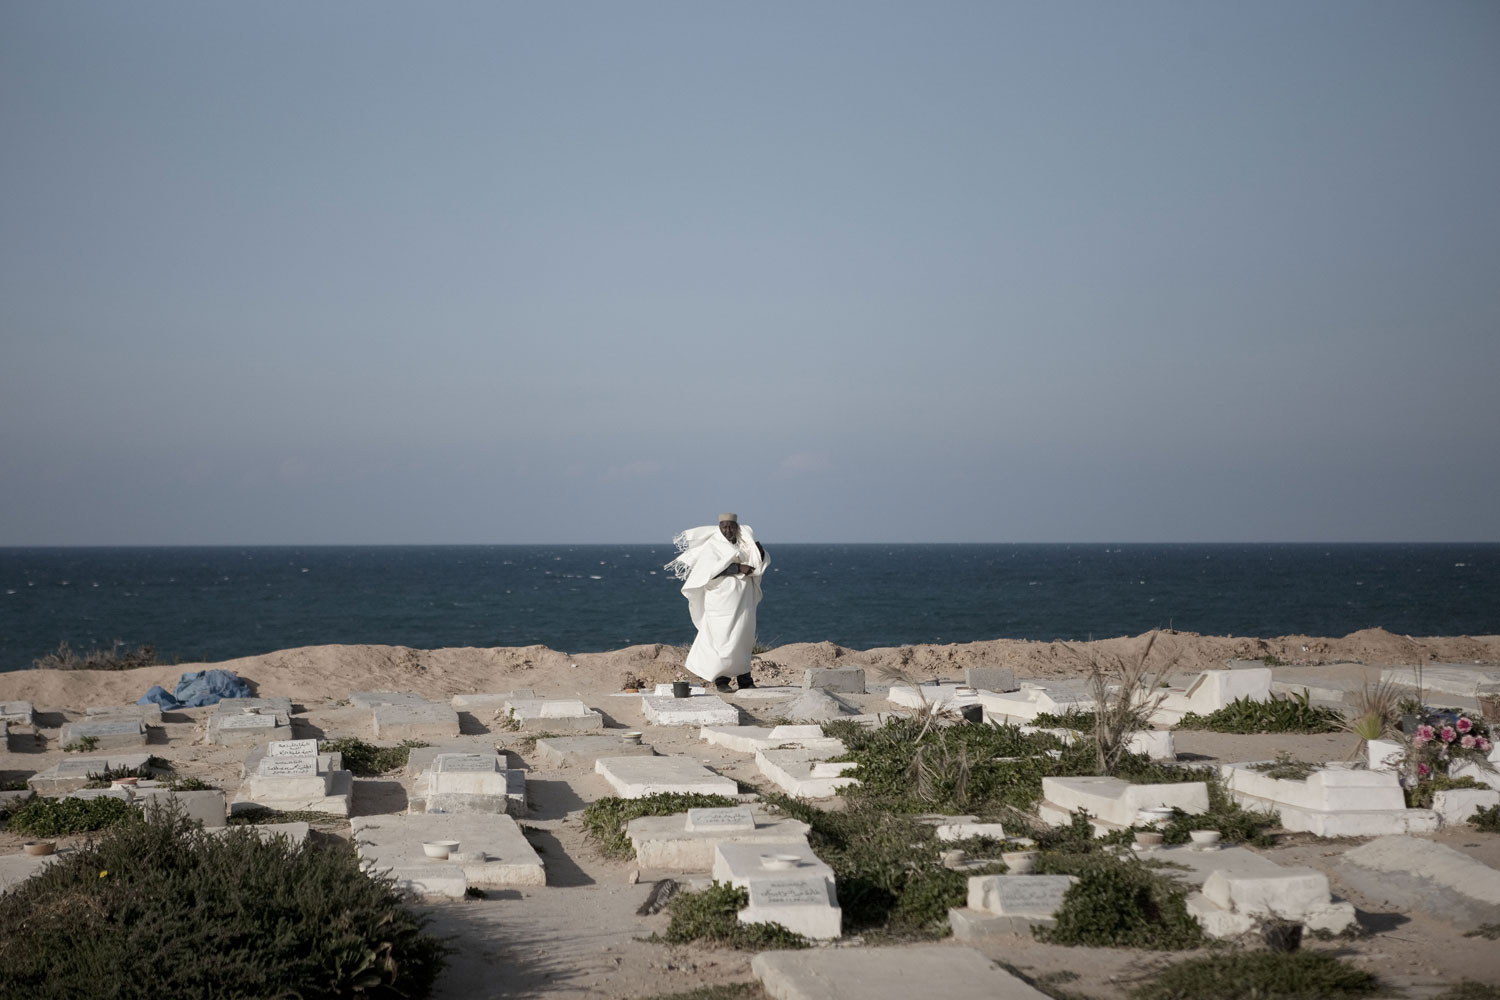 Christopher Morris. From  Theater and War.  Published on LightBox, April 8, 2011.
                              A man watches a funeral procession at Martyrs Cemetery in Tripoli, March 24, 2011.